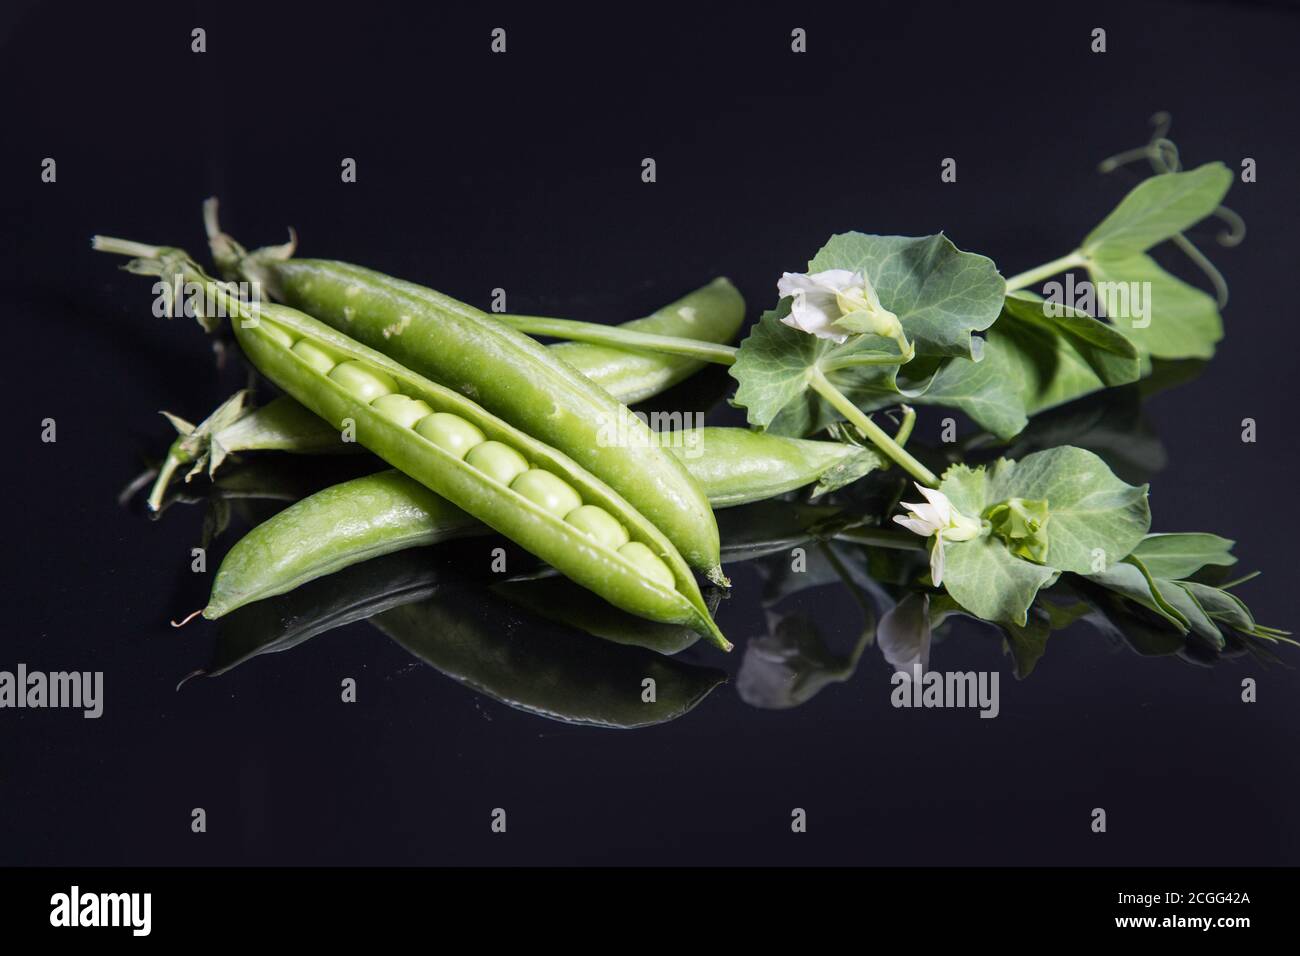 Green pea pods lie on a black background with a mirror image. Horizontal arrangement Stock Photo